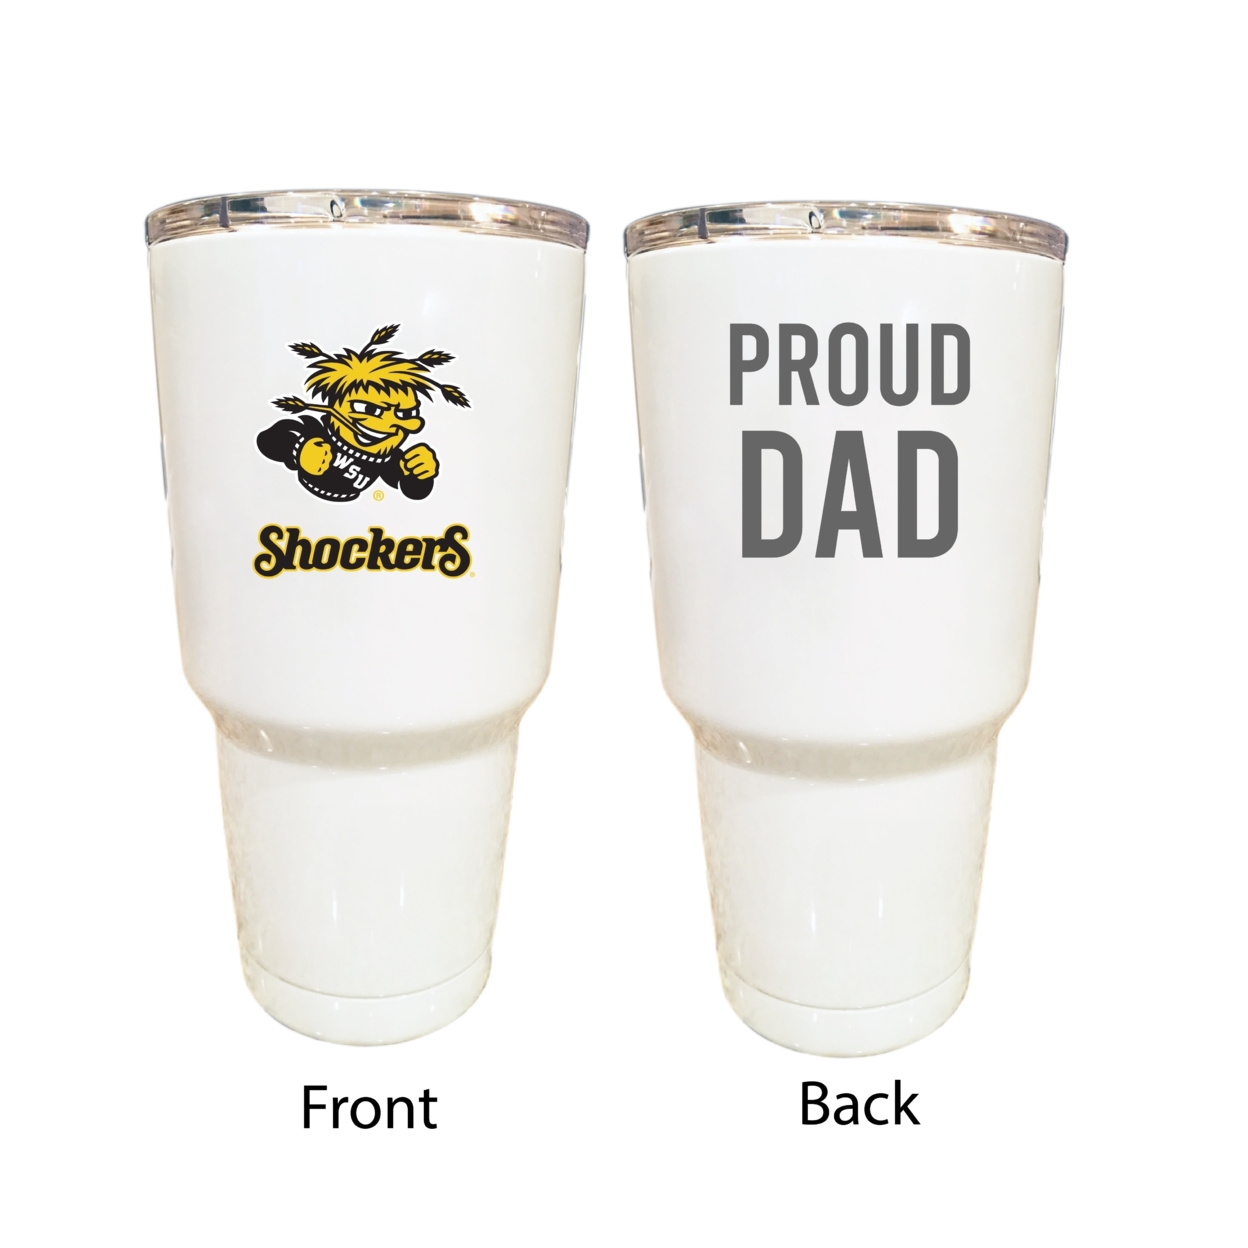 Wichita State Shockers Proud Dad 24 Oz Insulated Stainless Steel Tumblers Choose Your Color. - White